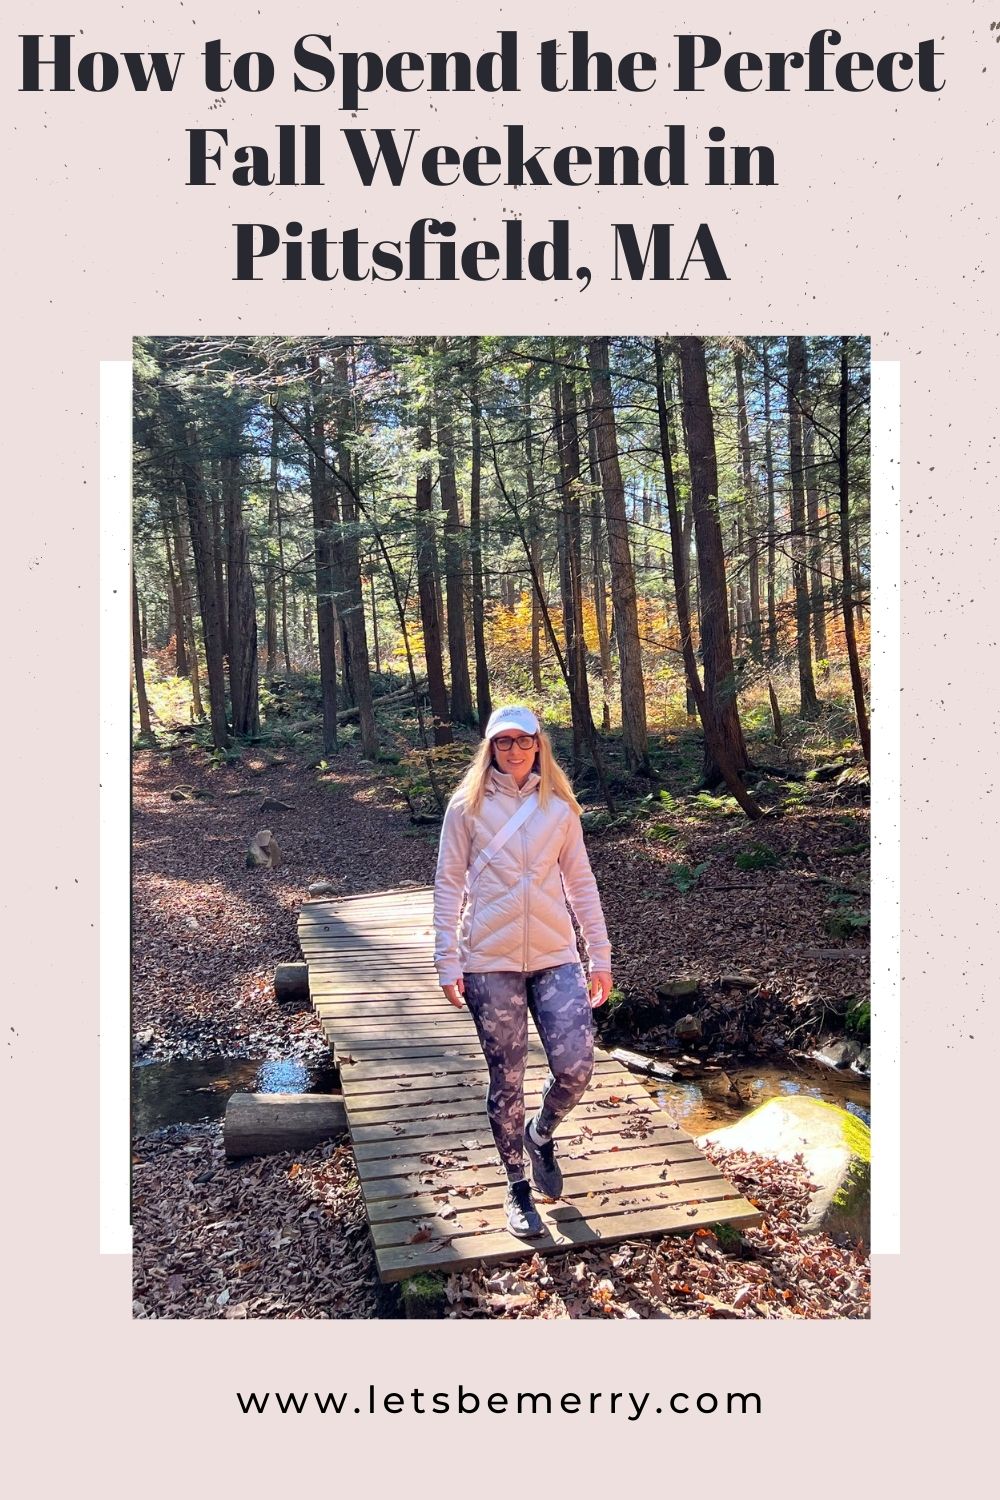 How to Spend a Perfect Fall Weekend in Pittsfield, Massachusetts in the Berkshires